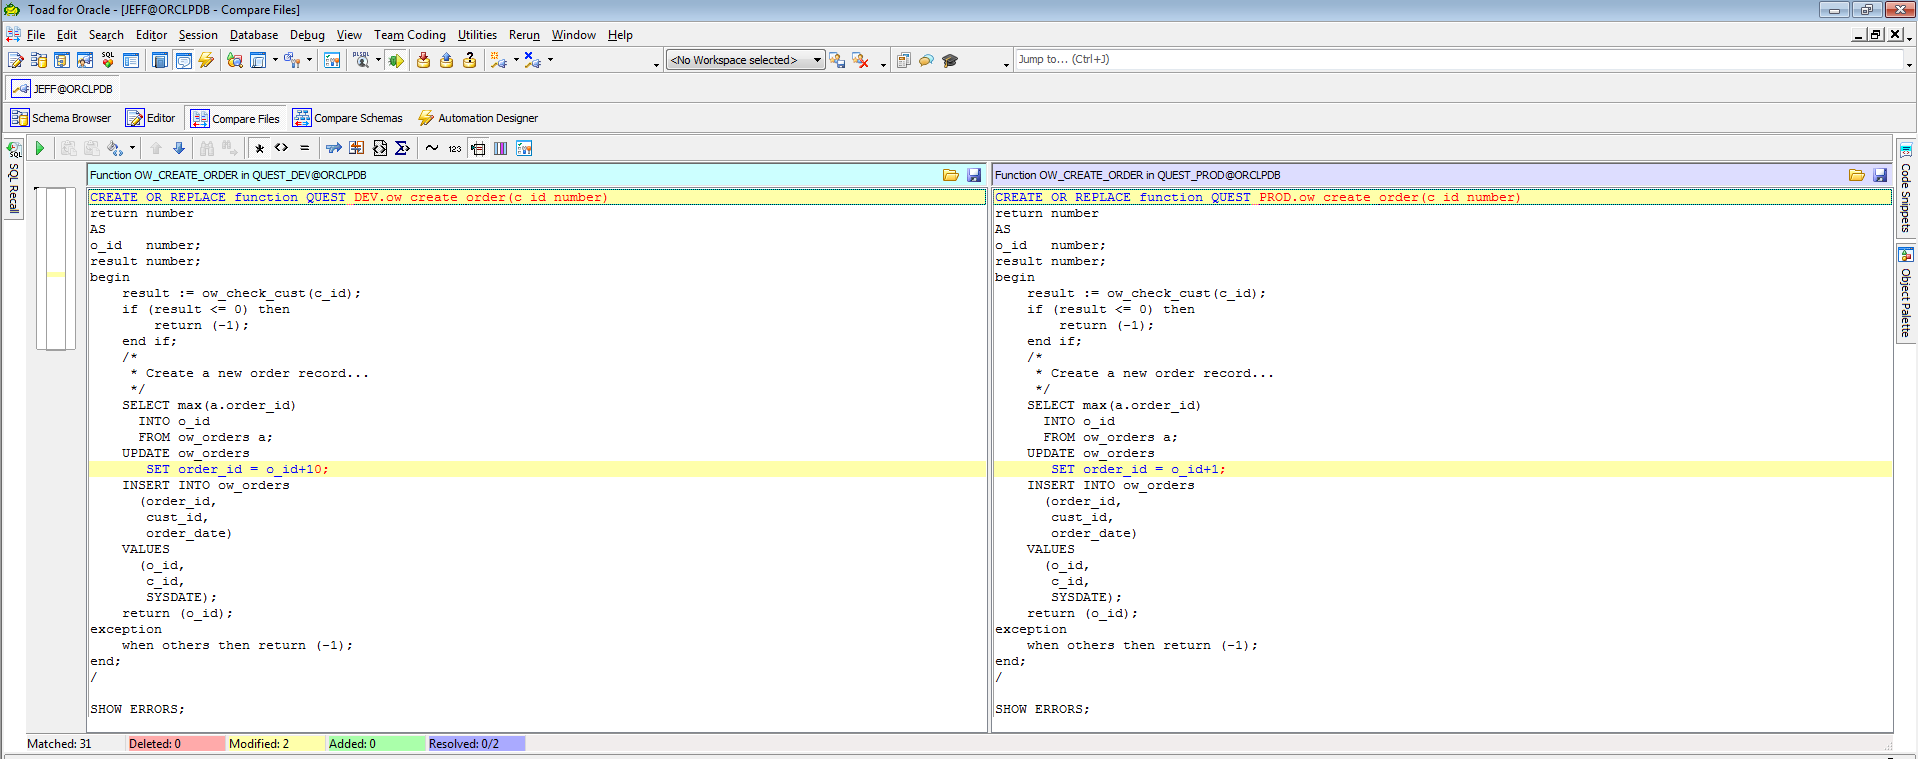 Screen shot of comparing and syncing database changes from one environment to another.